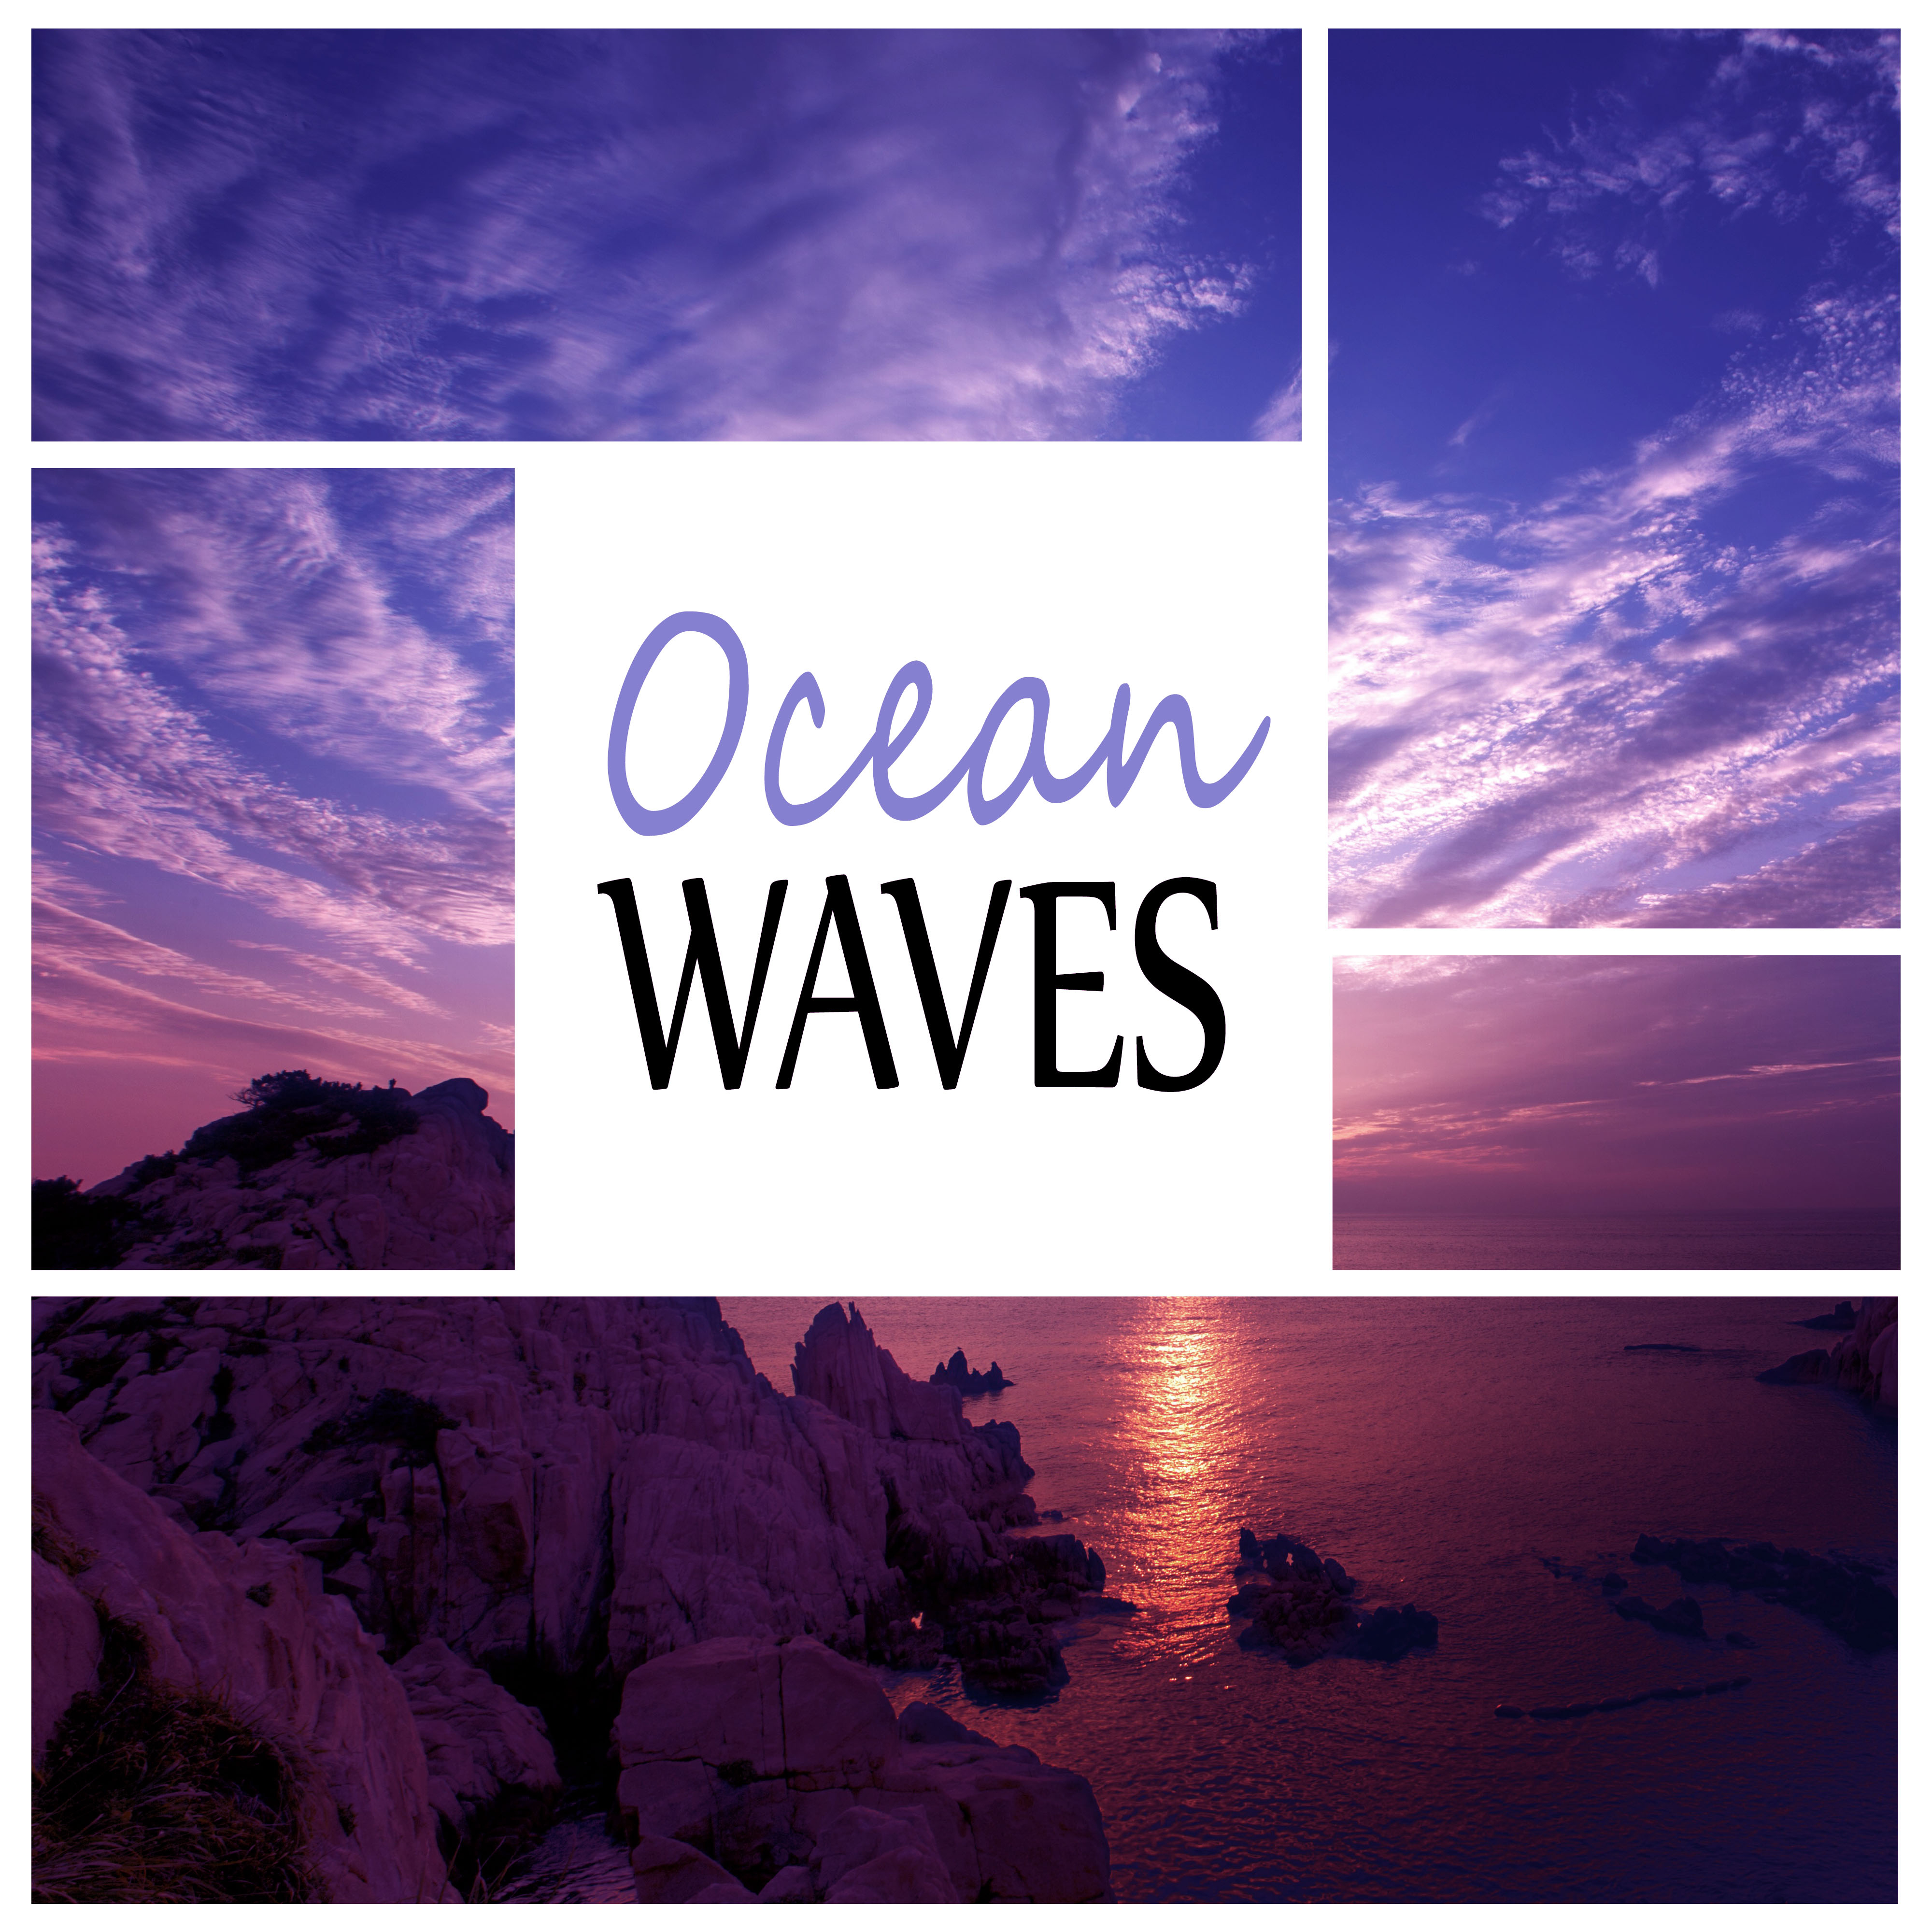 Ocean Waves - Time to Spa Music Background for Wellness, Massage Therapy, Nature Ocean Sounds, Mindfulness Meditation